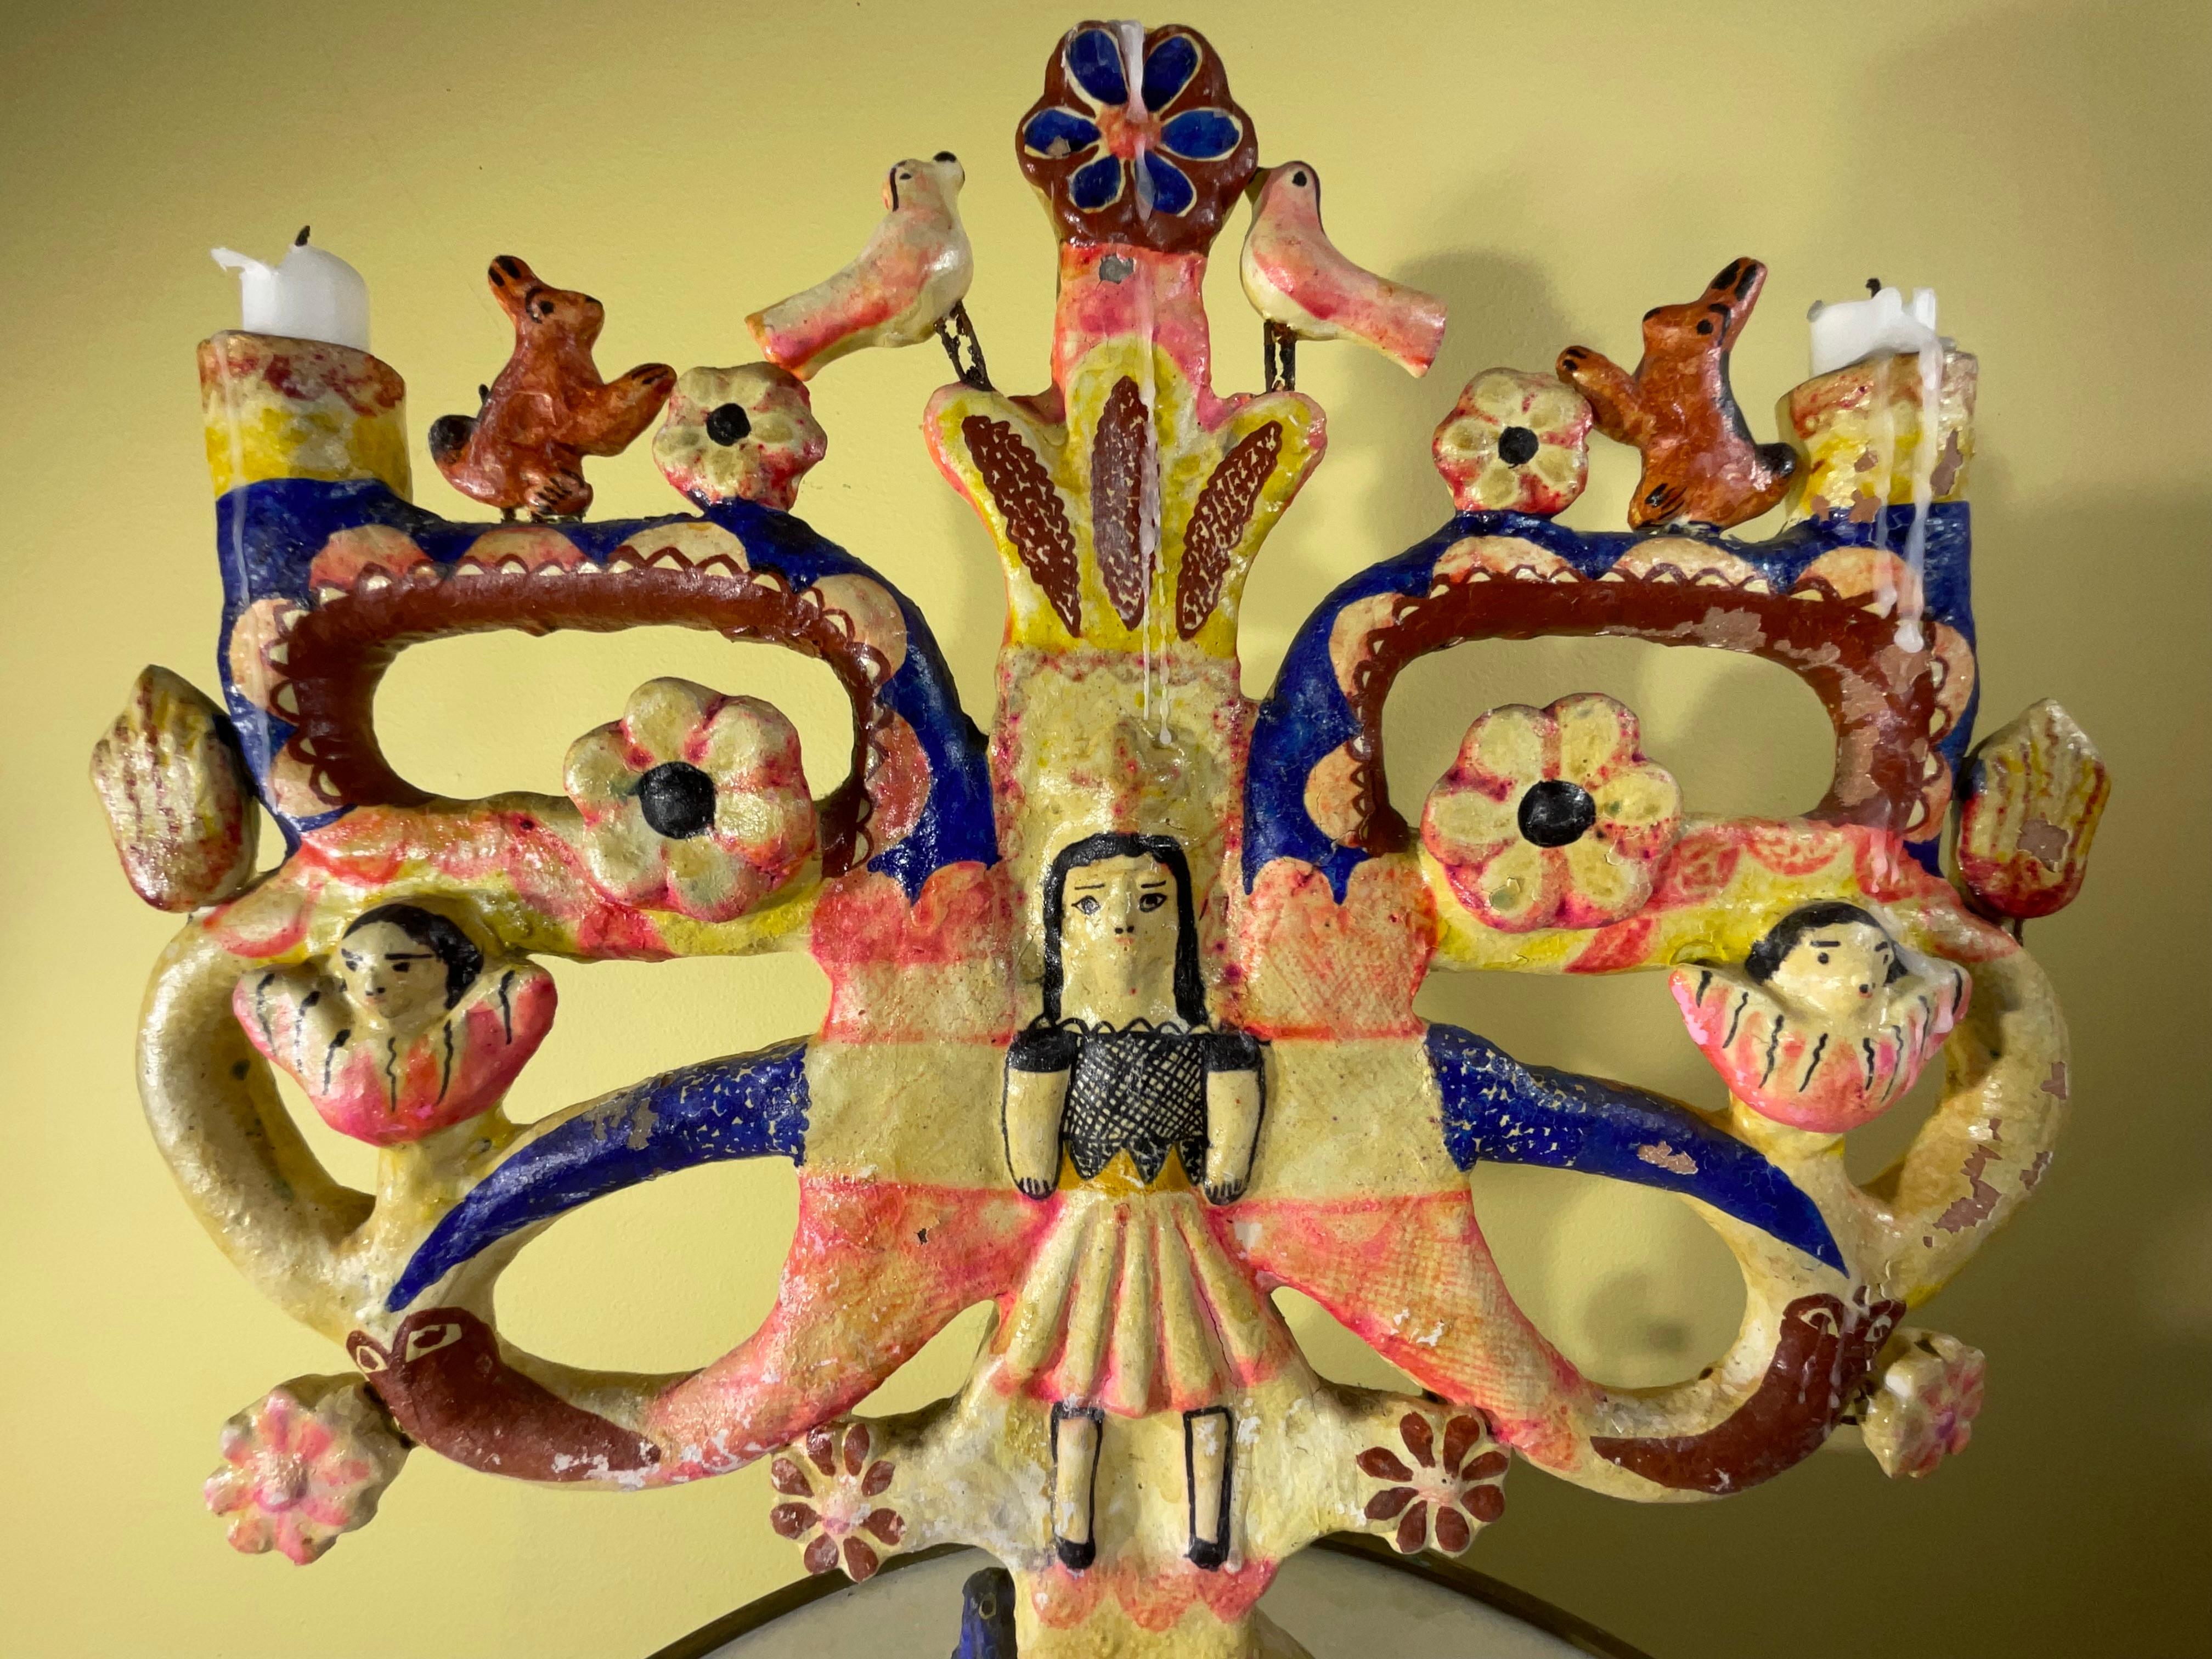 Beautiful Vintage hand painted ceramic candelabra , made in the state of Puebla, Mexico. The traditional 